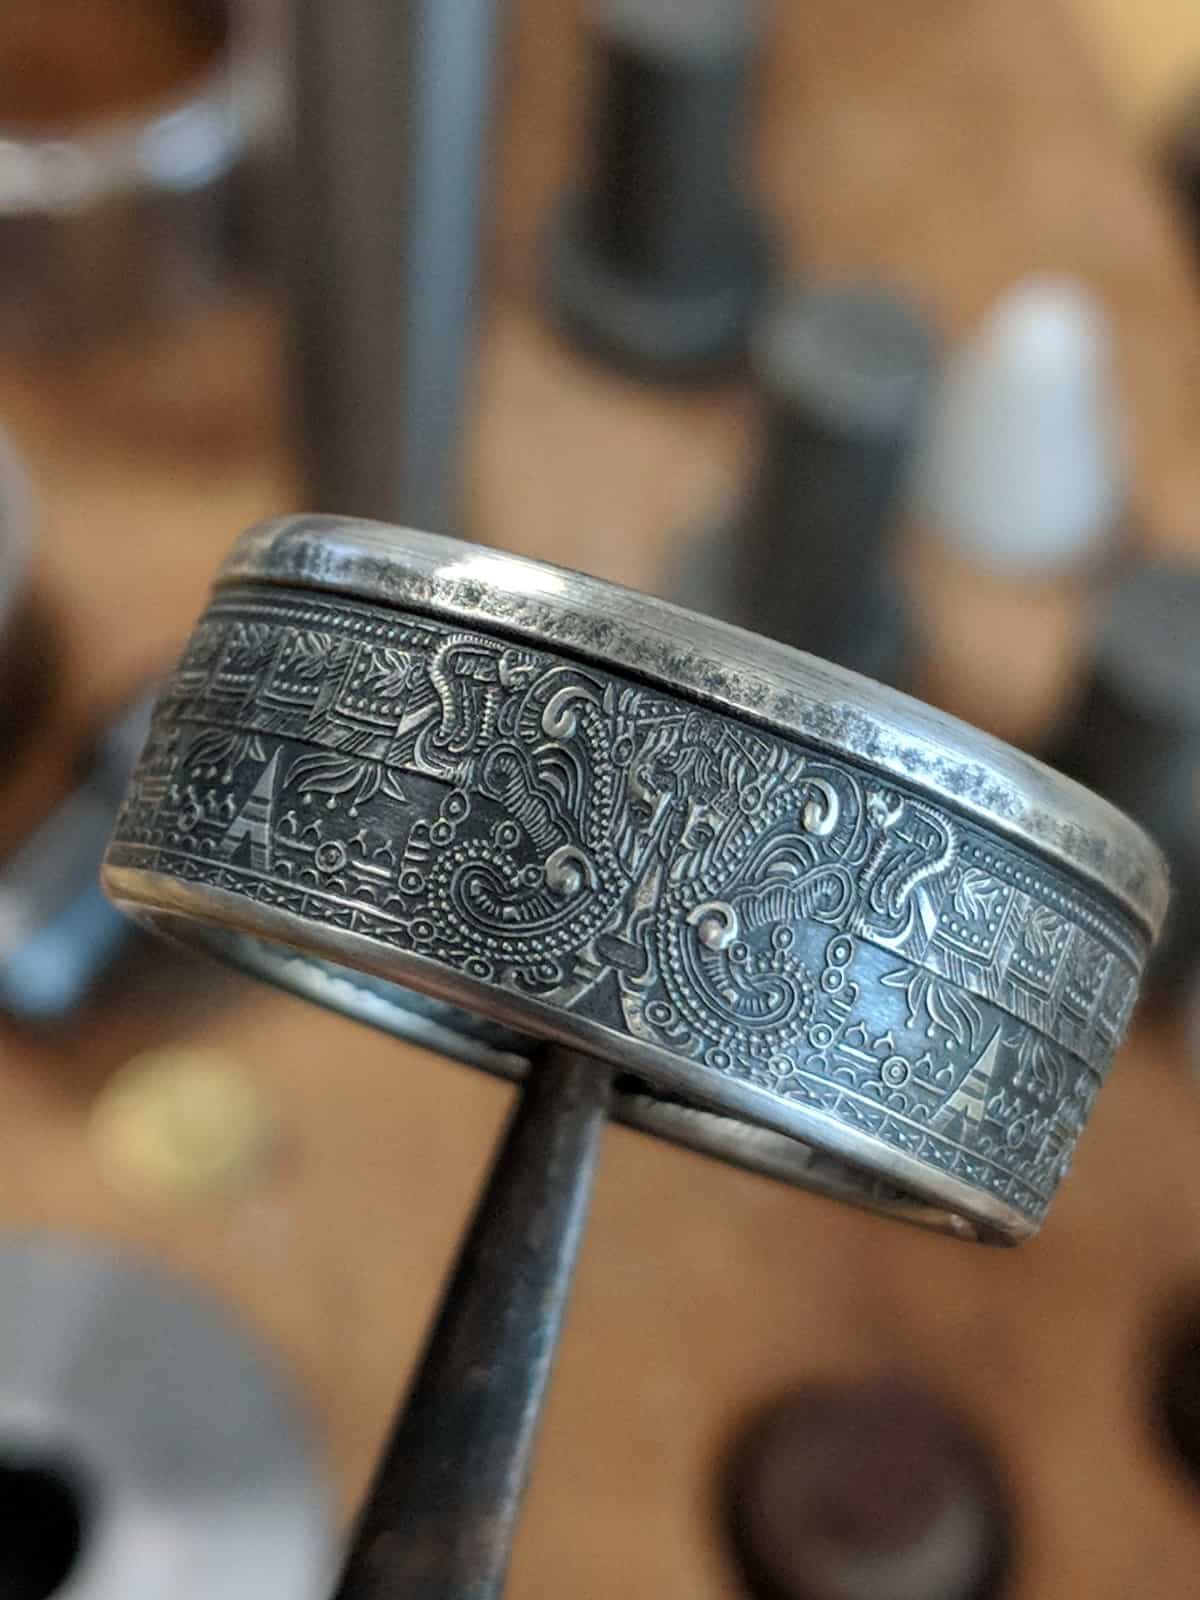 Aztec calendar coin ring with rich patina